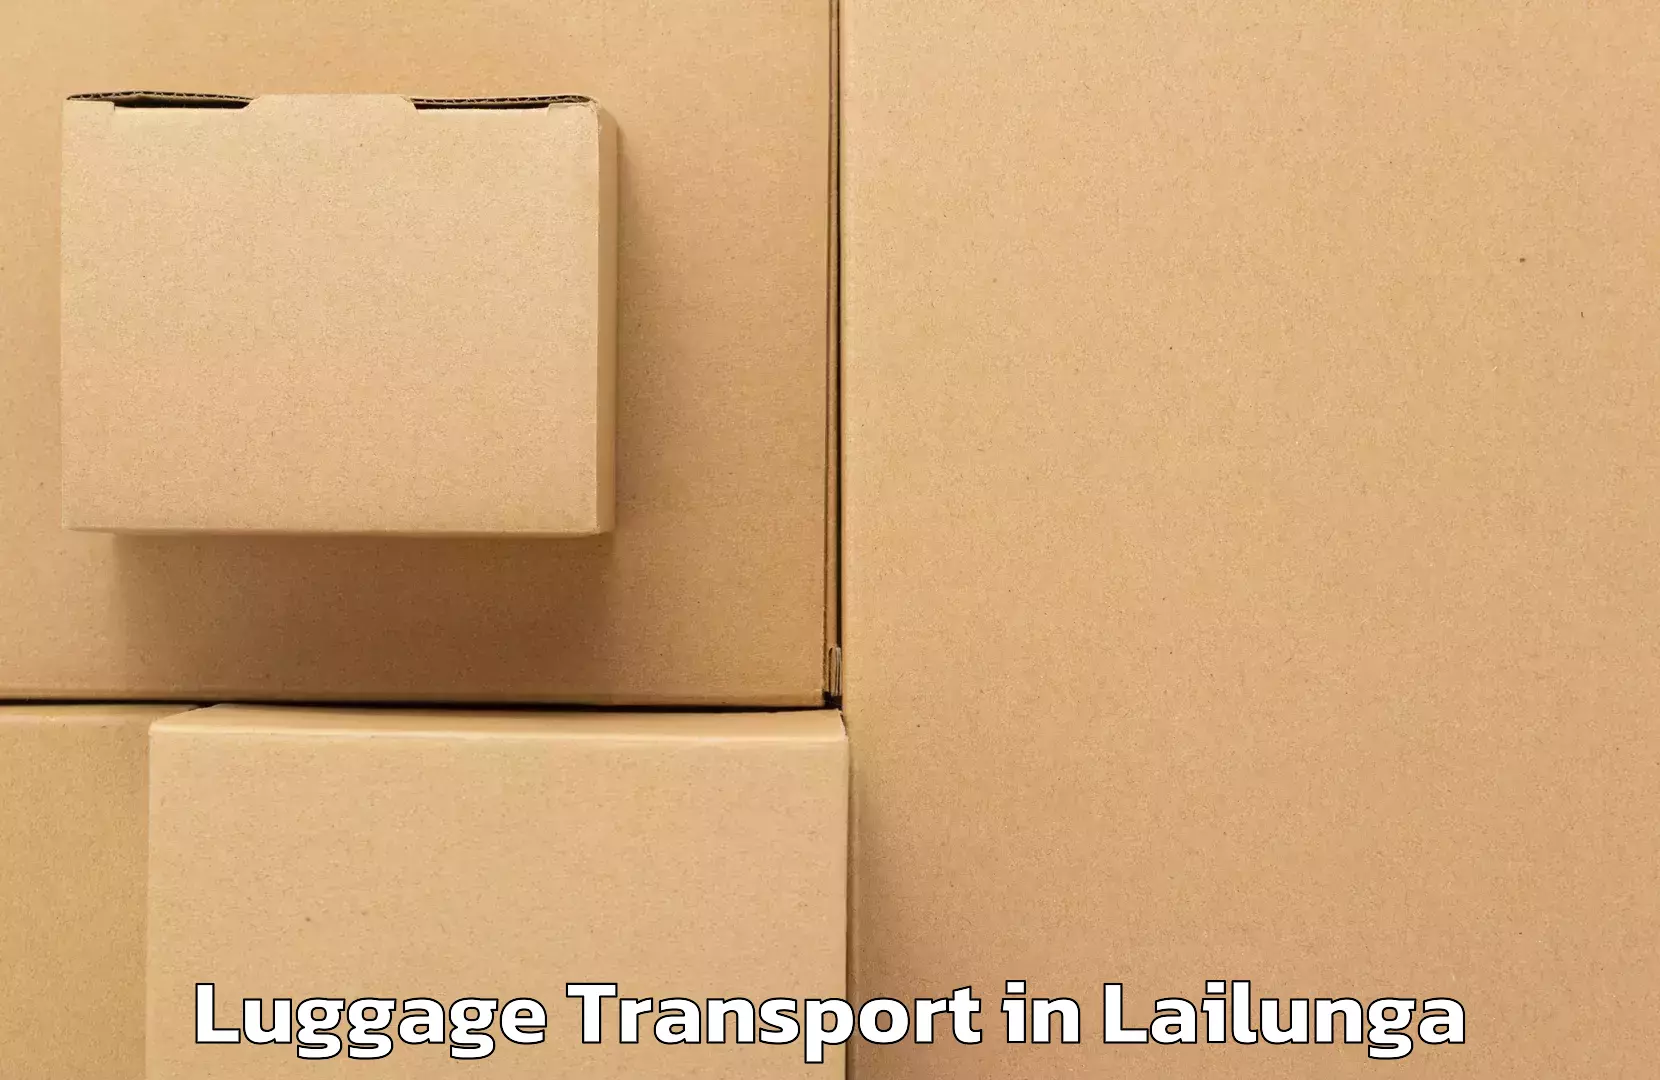 Suburban luggage delivery in Lailunga